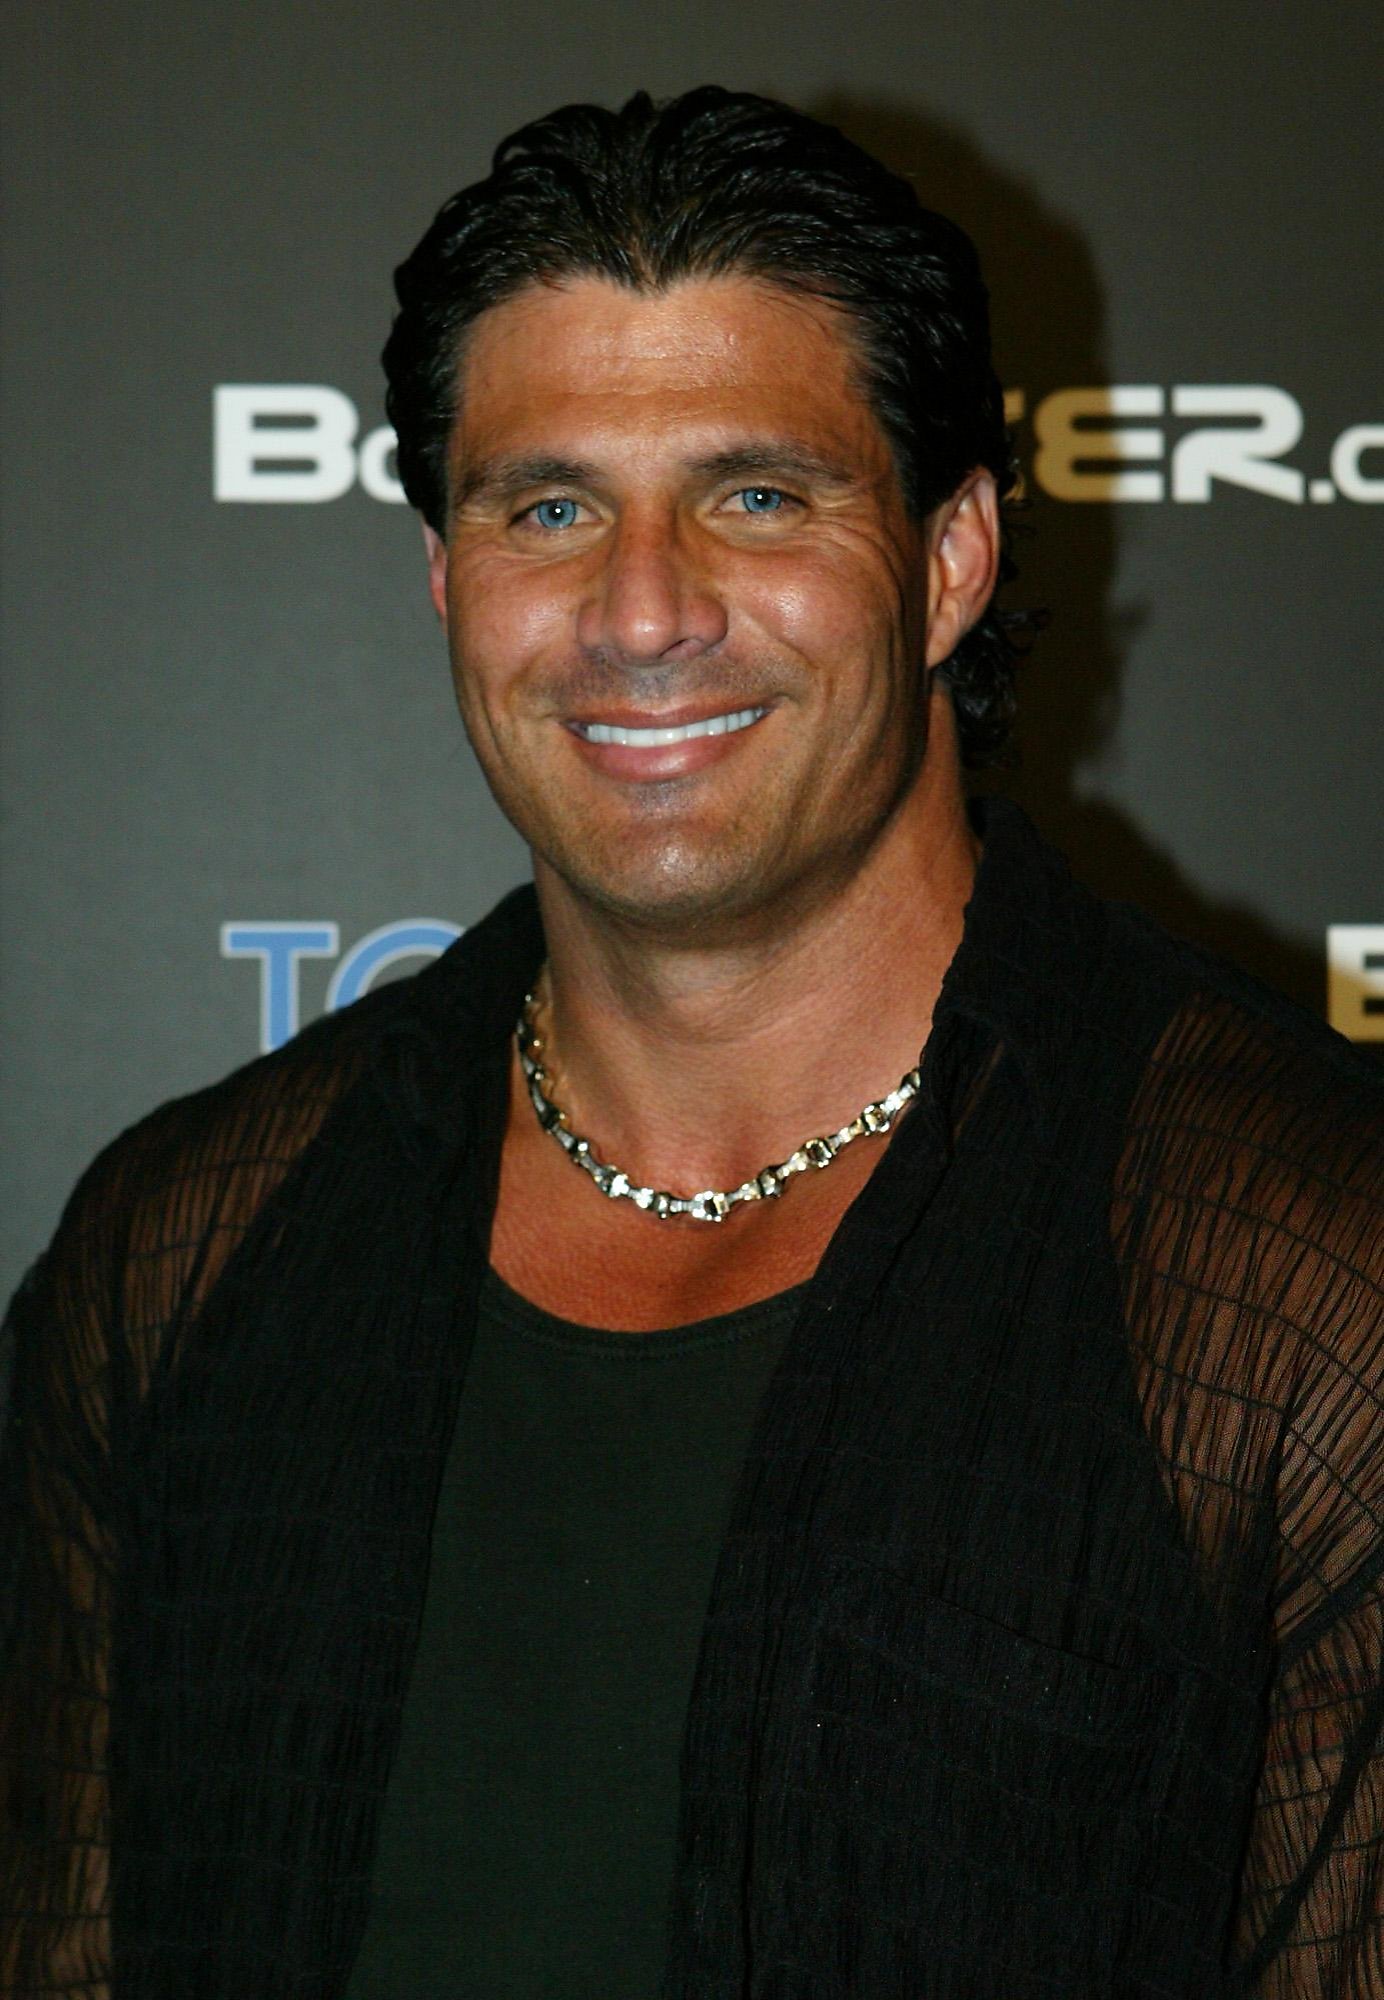 Twitter rant costs Jose Canseco his job as A's TV analyst